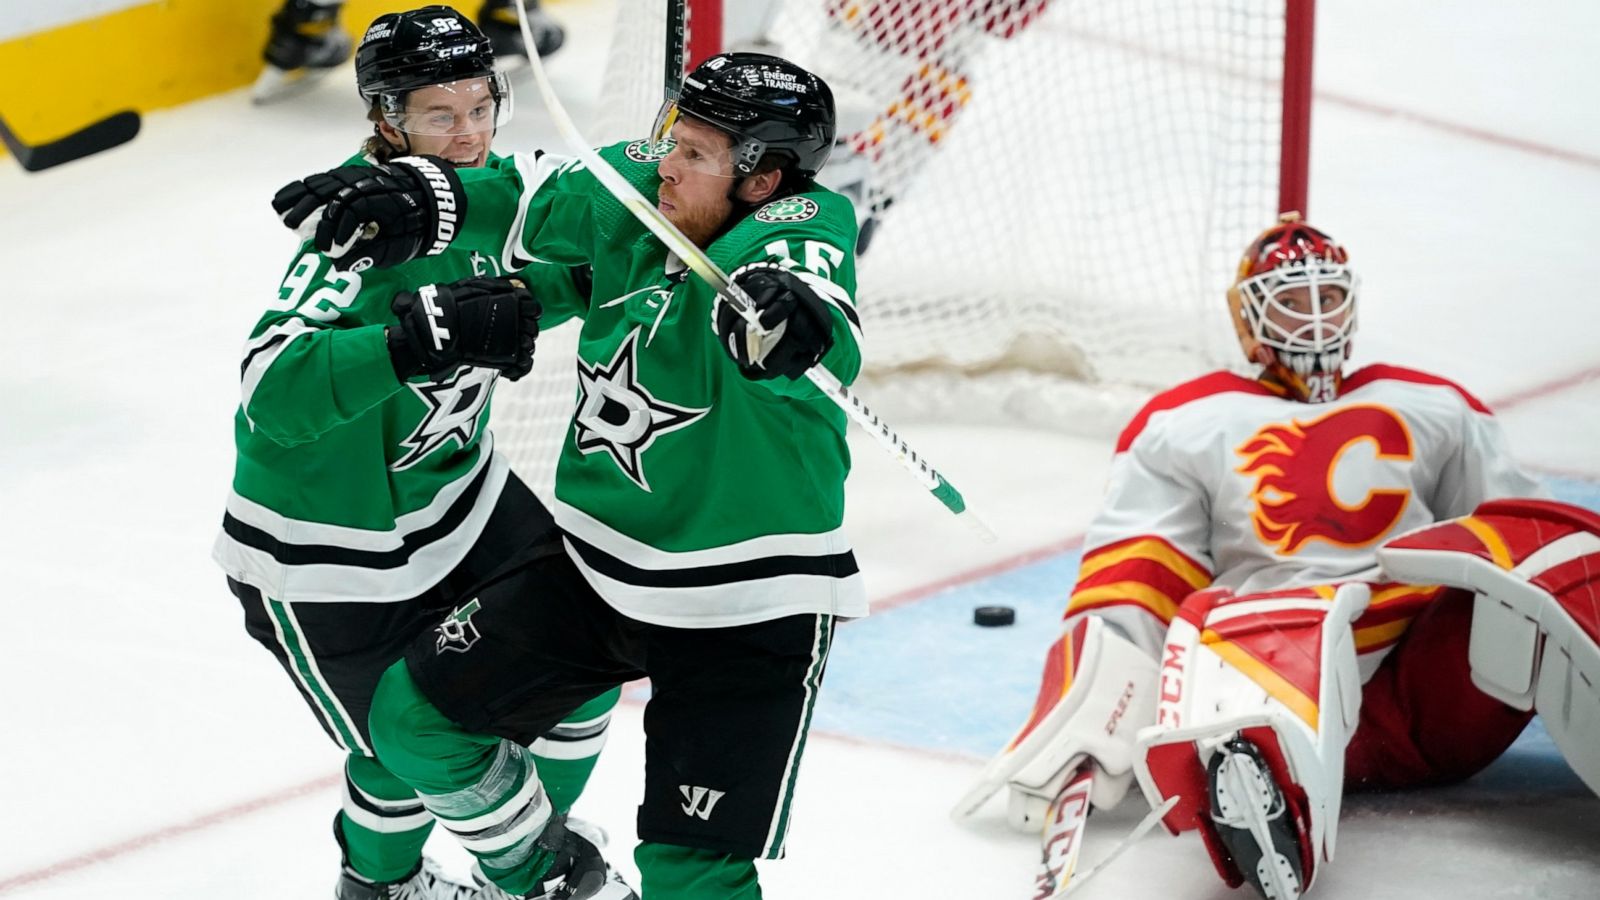 Flames take a 3-0 series lead over Stars.